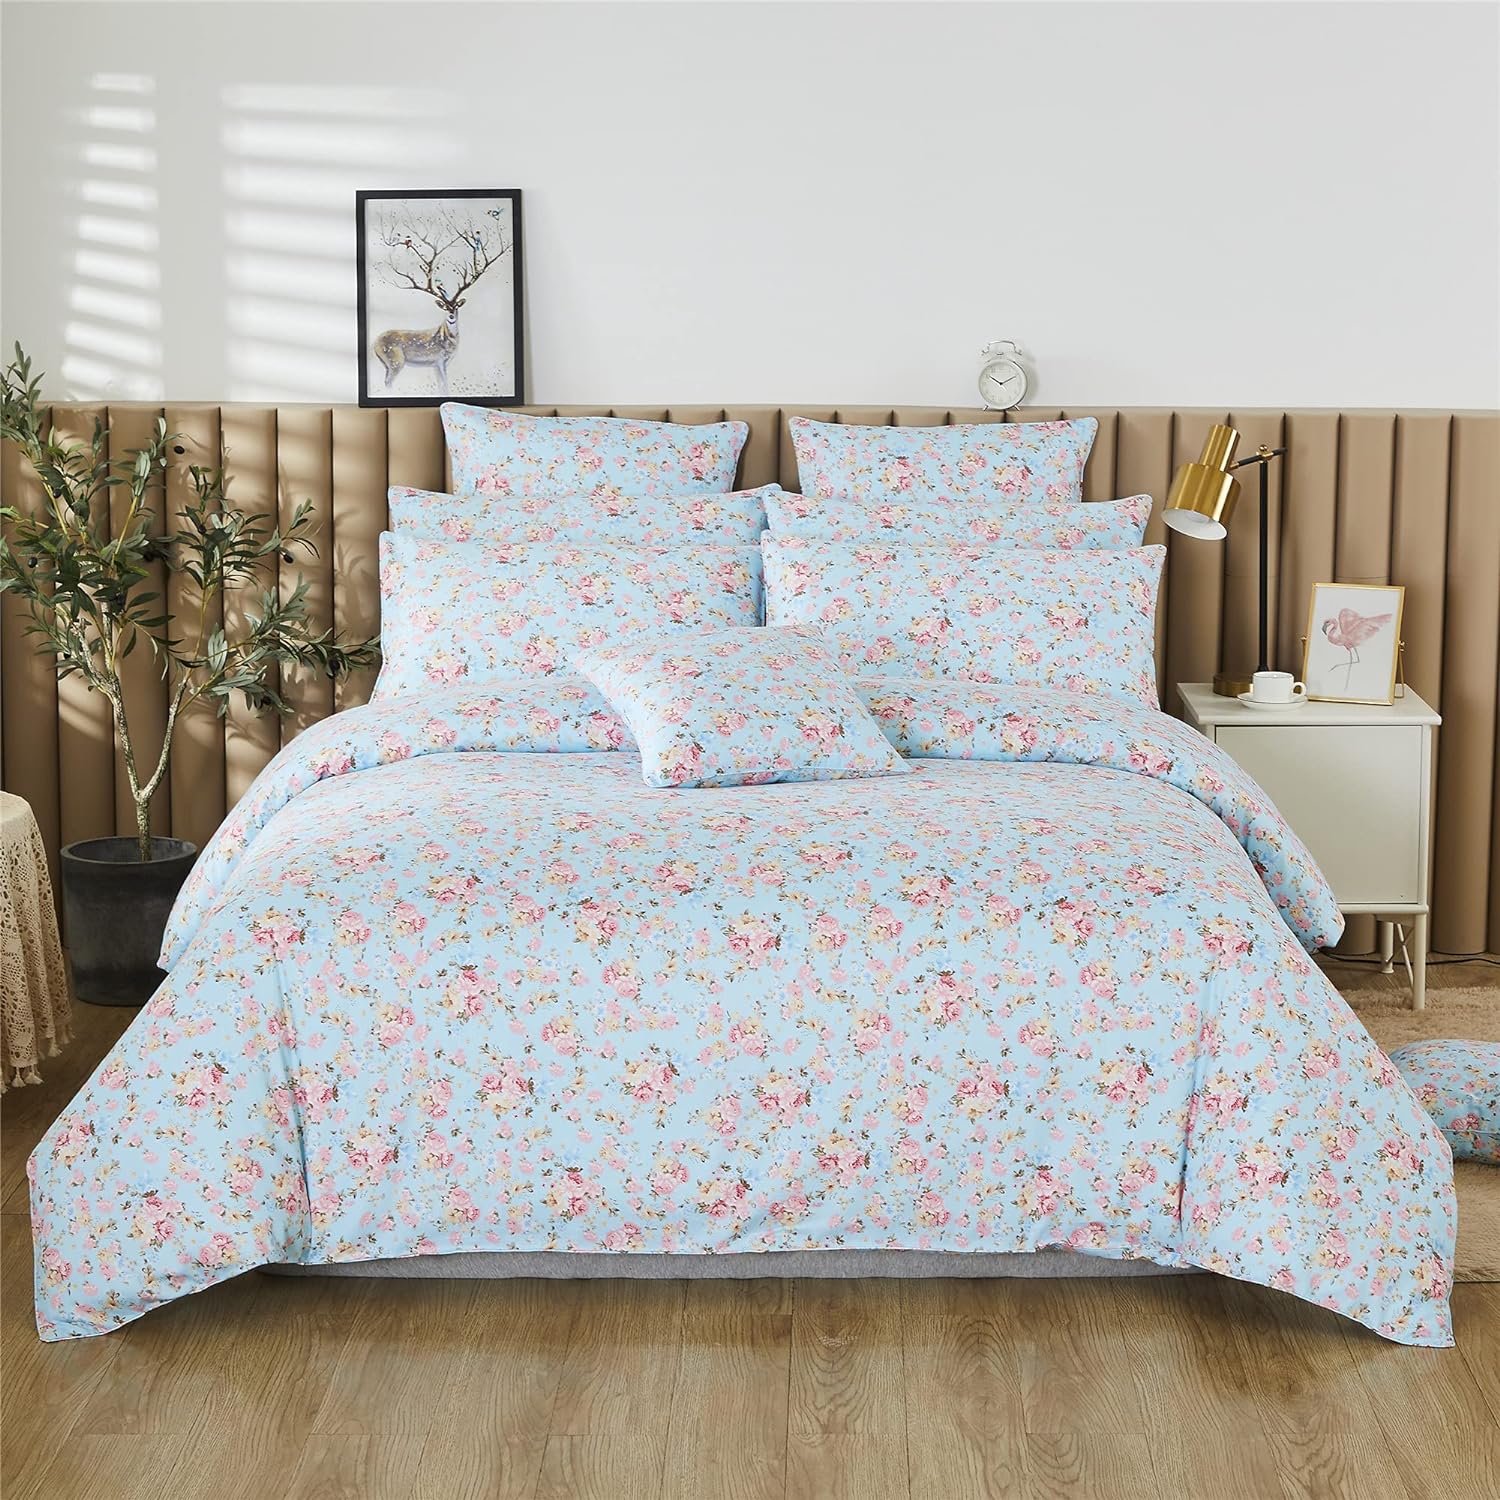 FADFAY Duvet Cover Set Queen Romantic Rose Floral Bedding Shabby Blue Rose Sheets Vintage Farmhouse Bedding 100% Cotton Extra Soft Comforter Cover Set with Zipper Closure 3Pcs, Queen Size